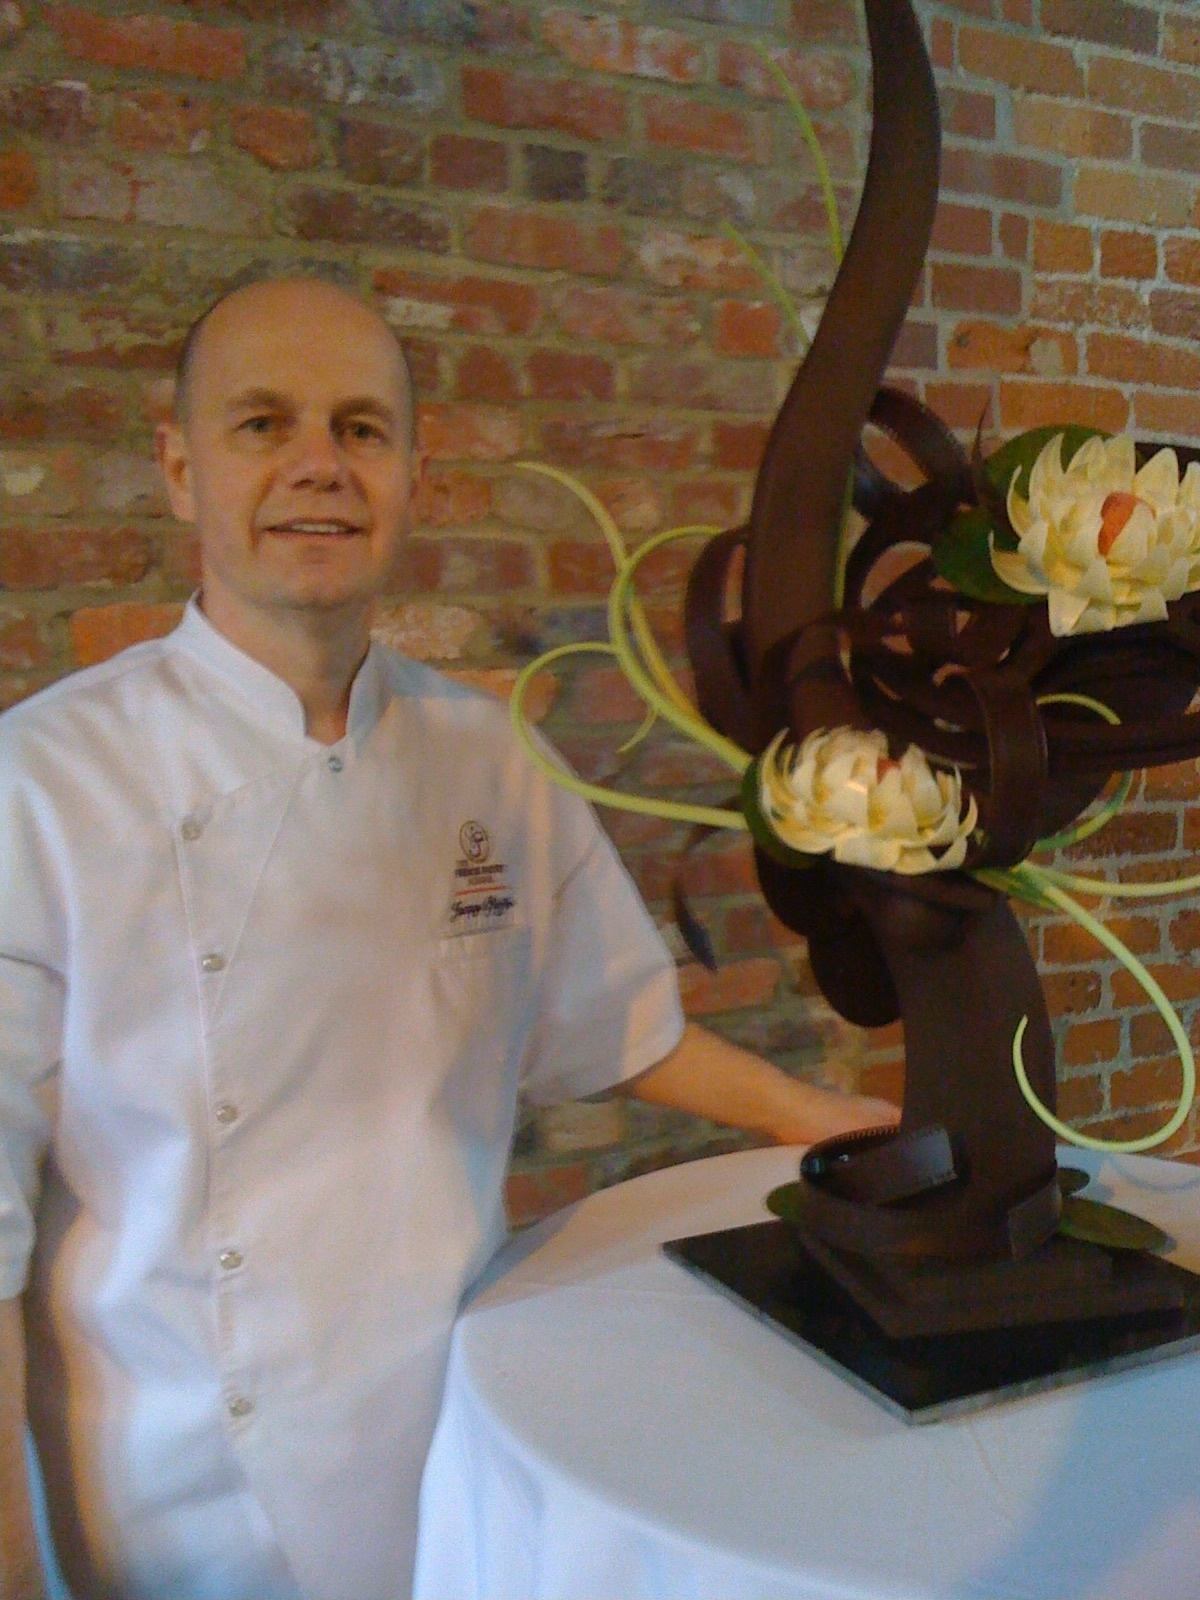 An image from “Kings of Pastry,” a 2010 documentary by Chris Hegedus and D.A. Pennebaker.